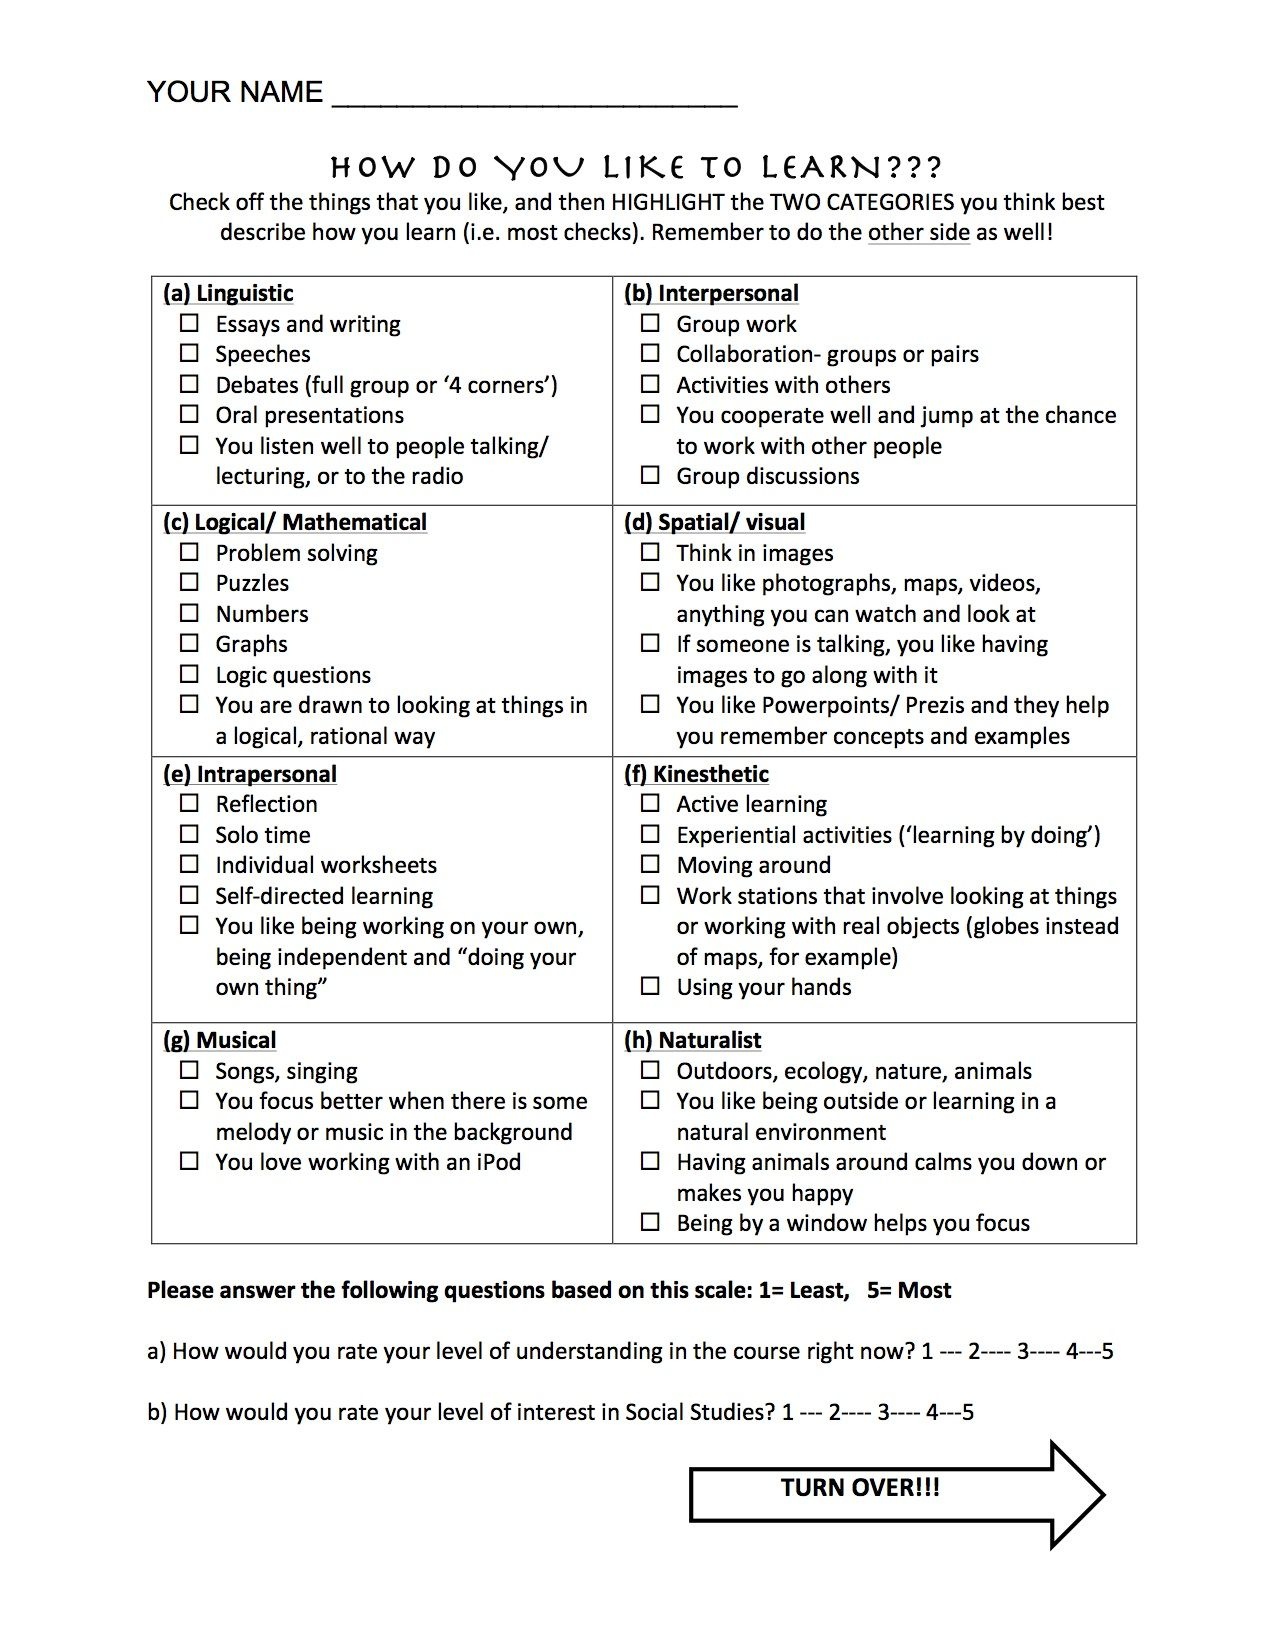 Learning Styles Questionnaire For High School- Beginning Of The Year - Free Learning Style Inventory For Students Printable